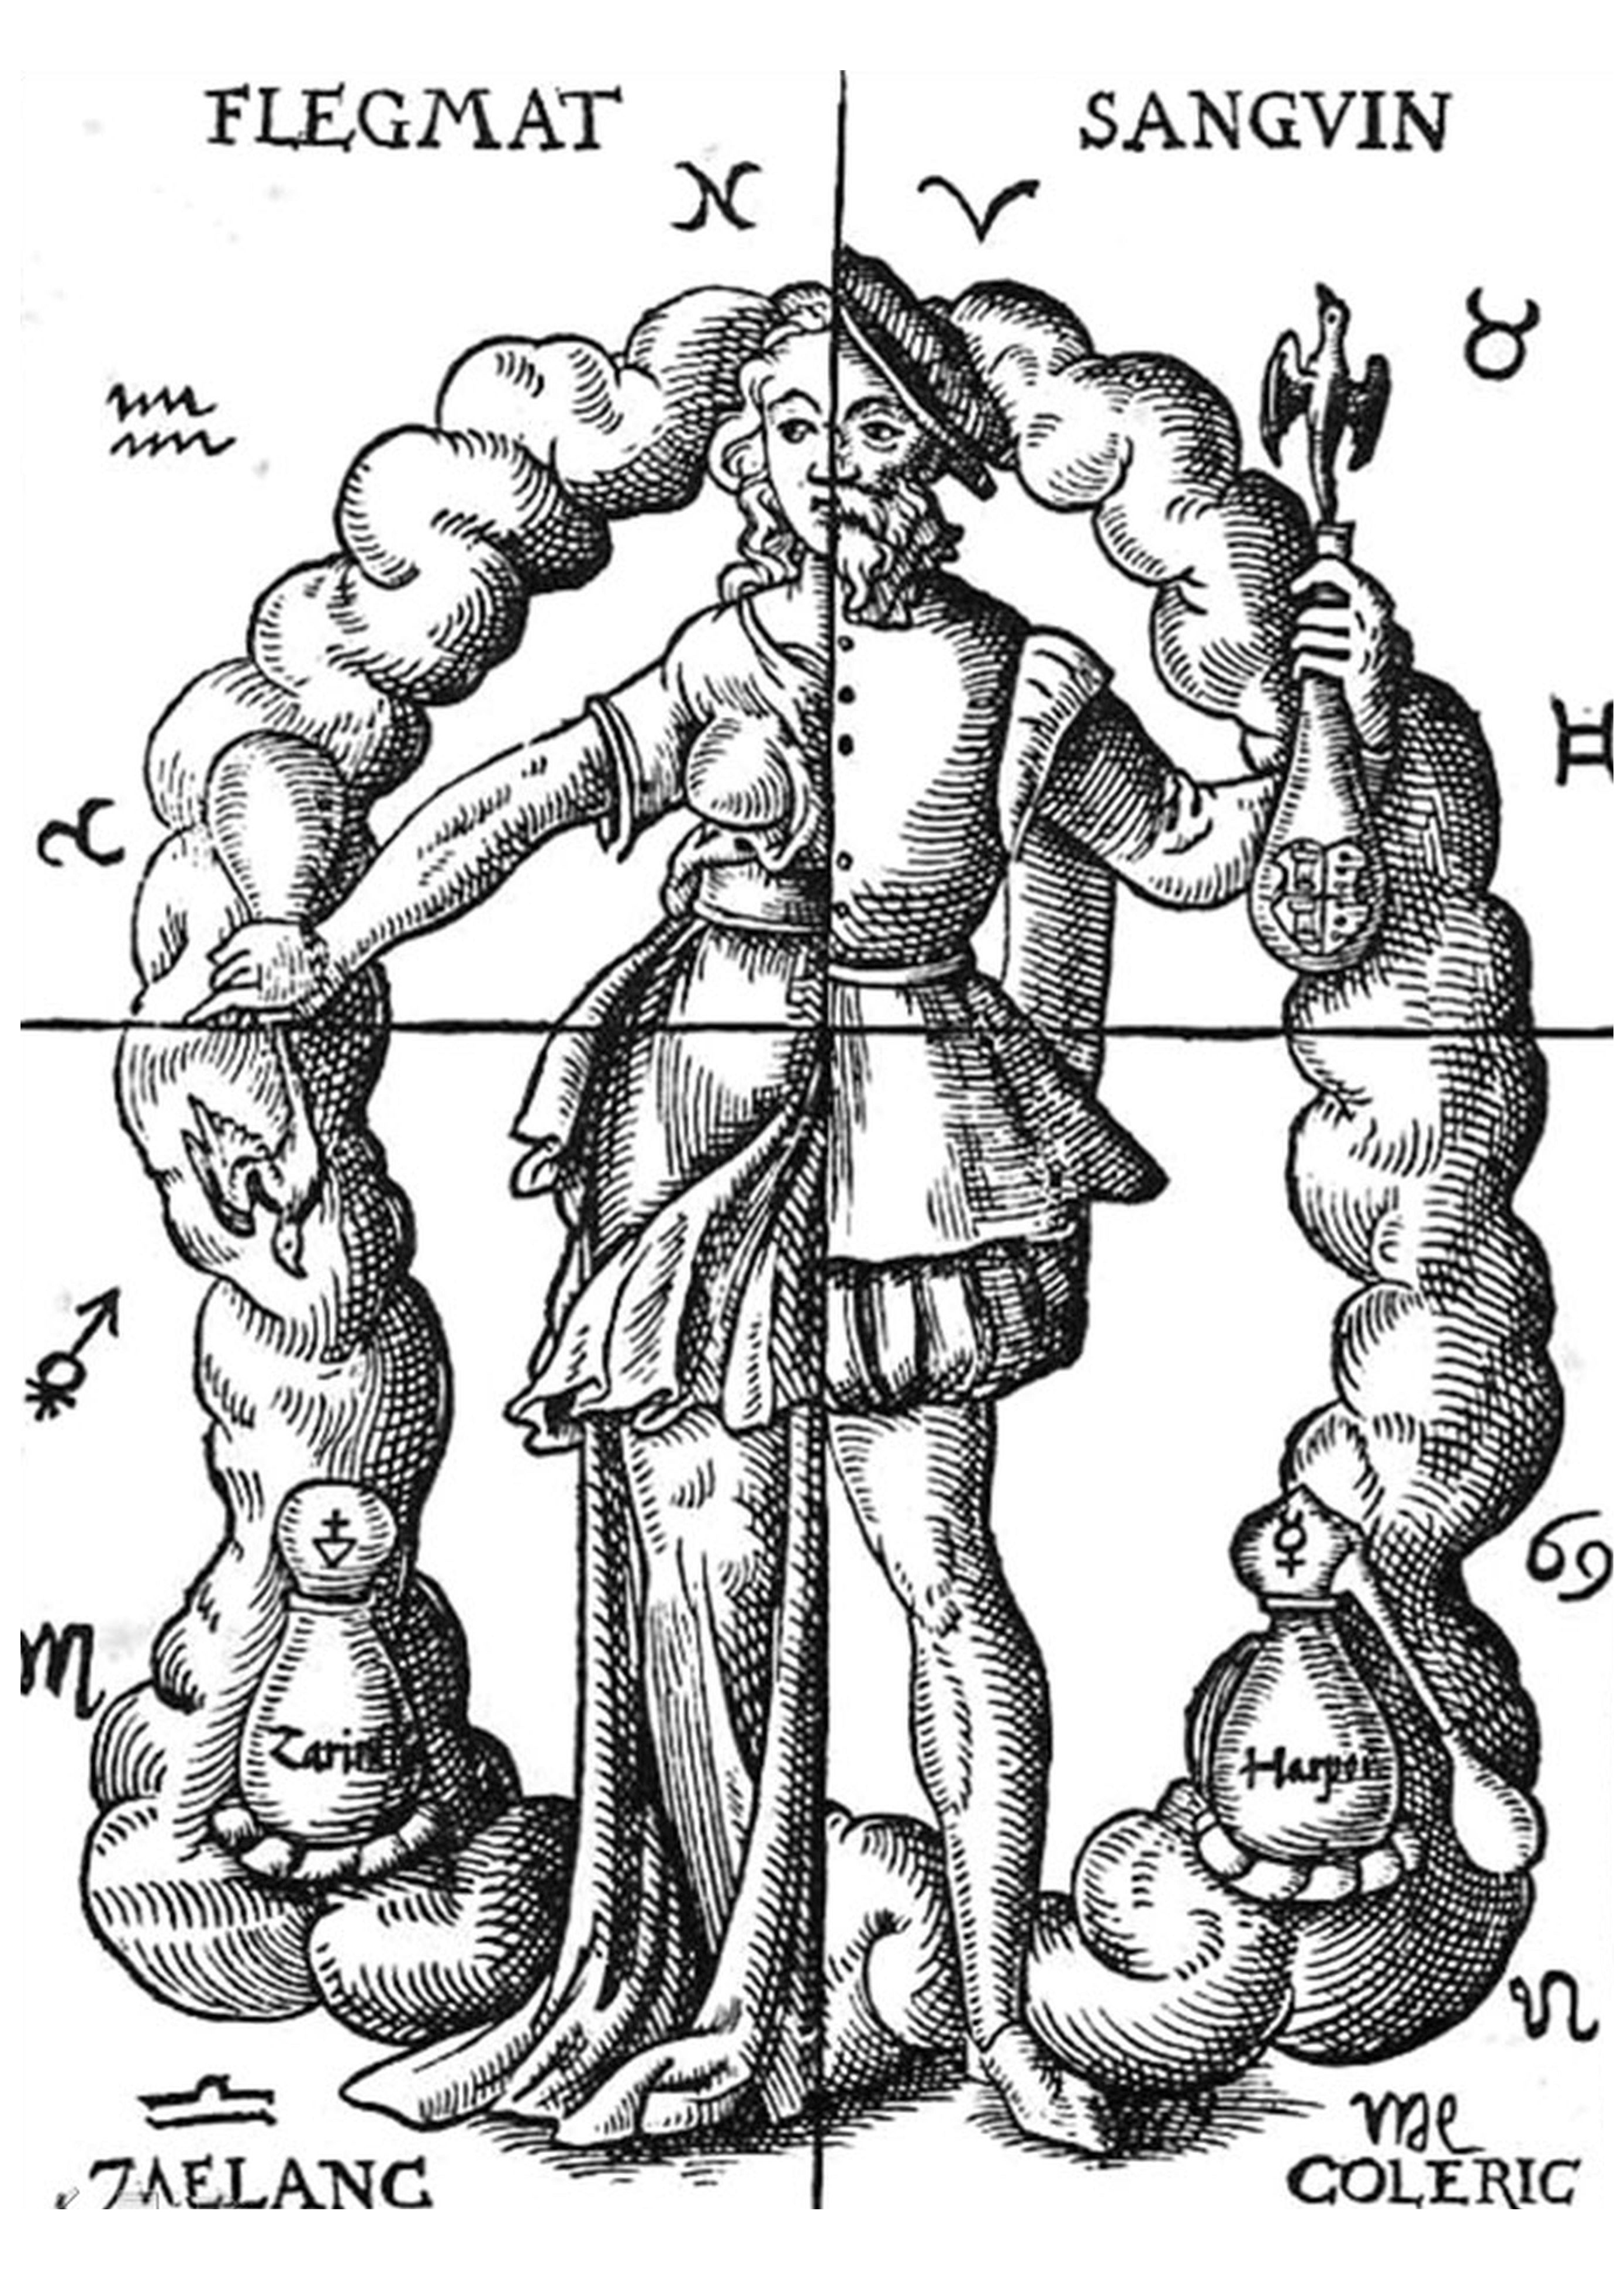 A black and white illustration of a human body divided into 4 quadrants, depicting the alchemic approach to four humors in relation to the four elements and zodiacal signs.